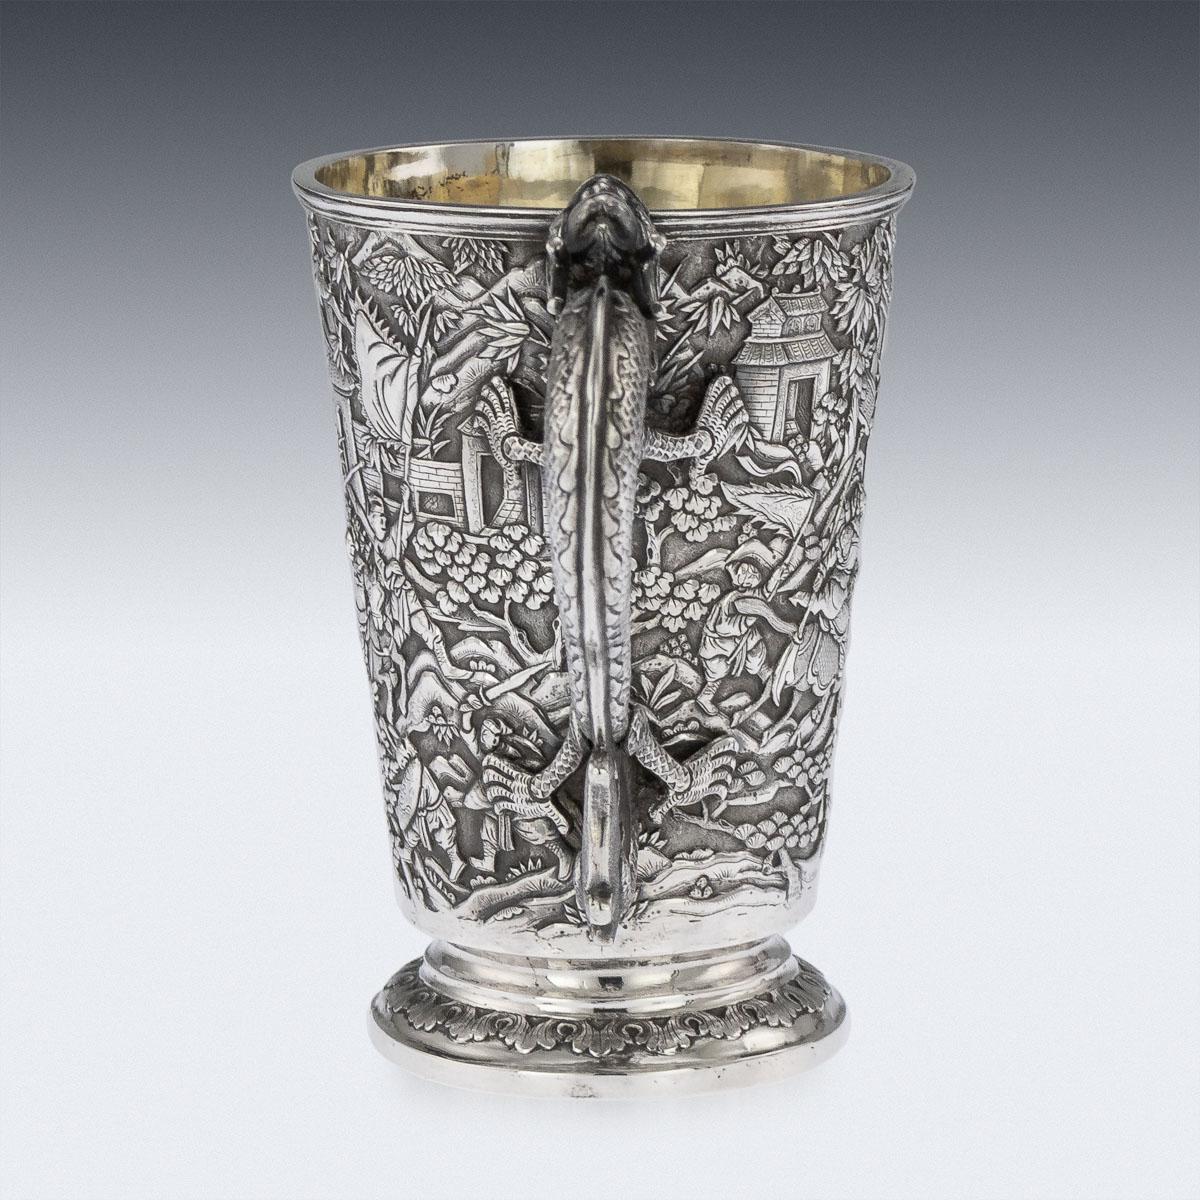 Antique 19th century Chinese export solid silver mug, of traditional shape and large size, the body is embossed with beautiful battle scenes in relief depicting Chinese warriors fighting amongst village landscape, double walled and richly gilt, the